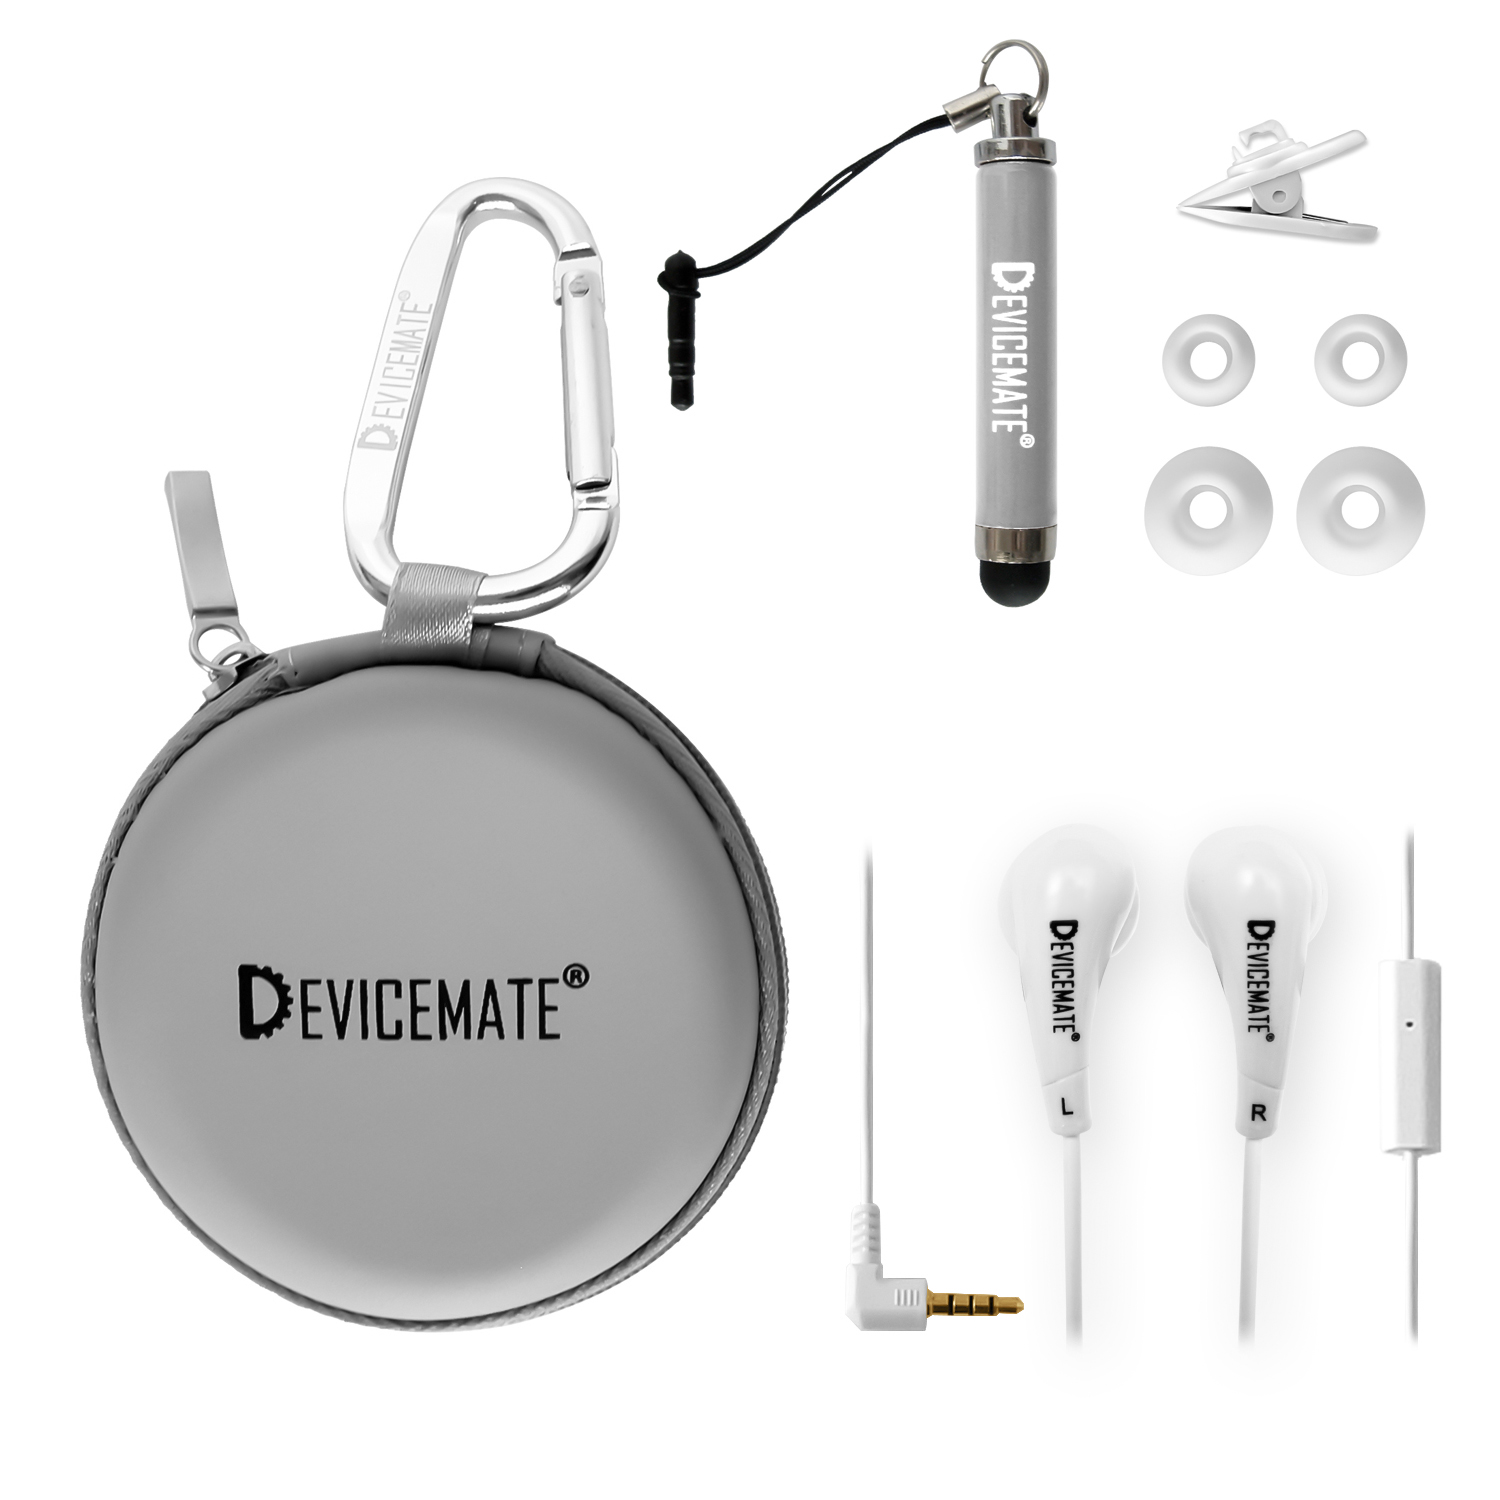 DEVICEMATE® SD 455-SLG Earphones w/mic for iPhone[Slt Gray] Case